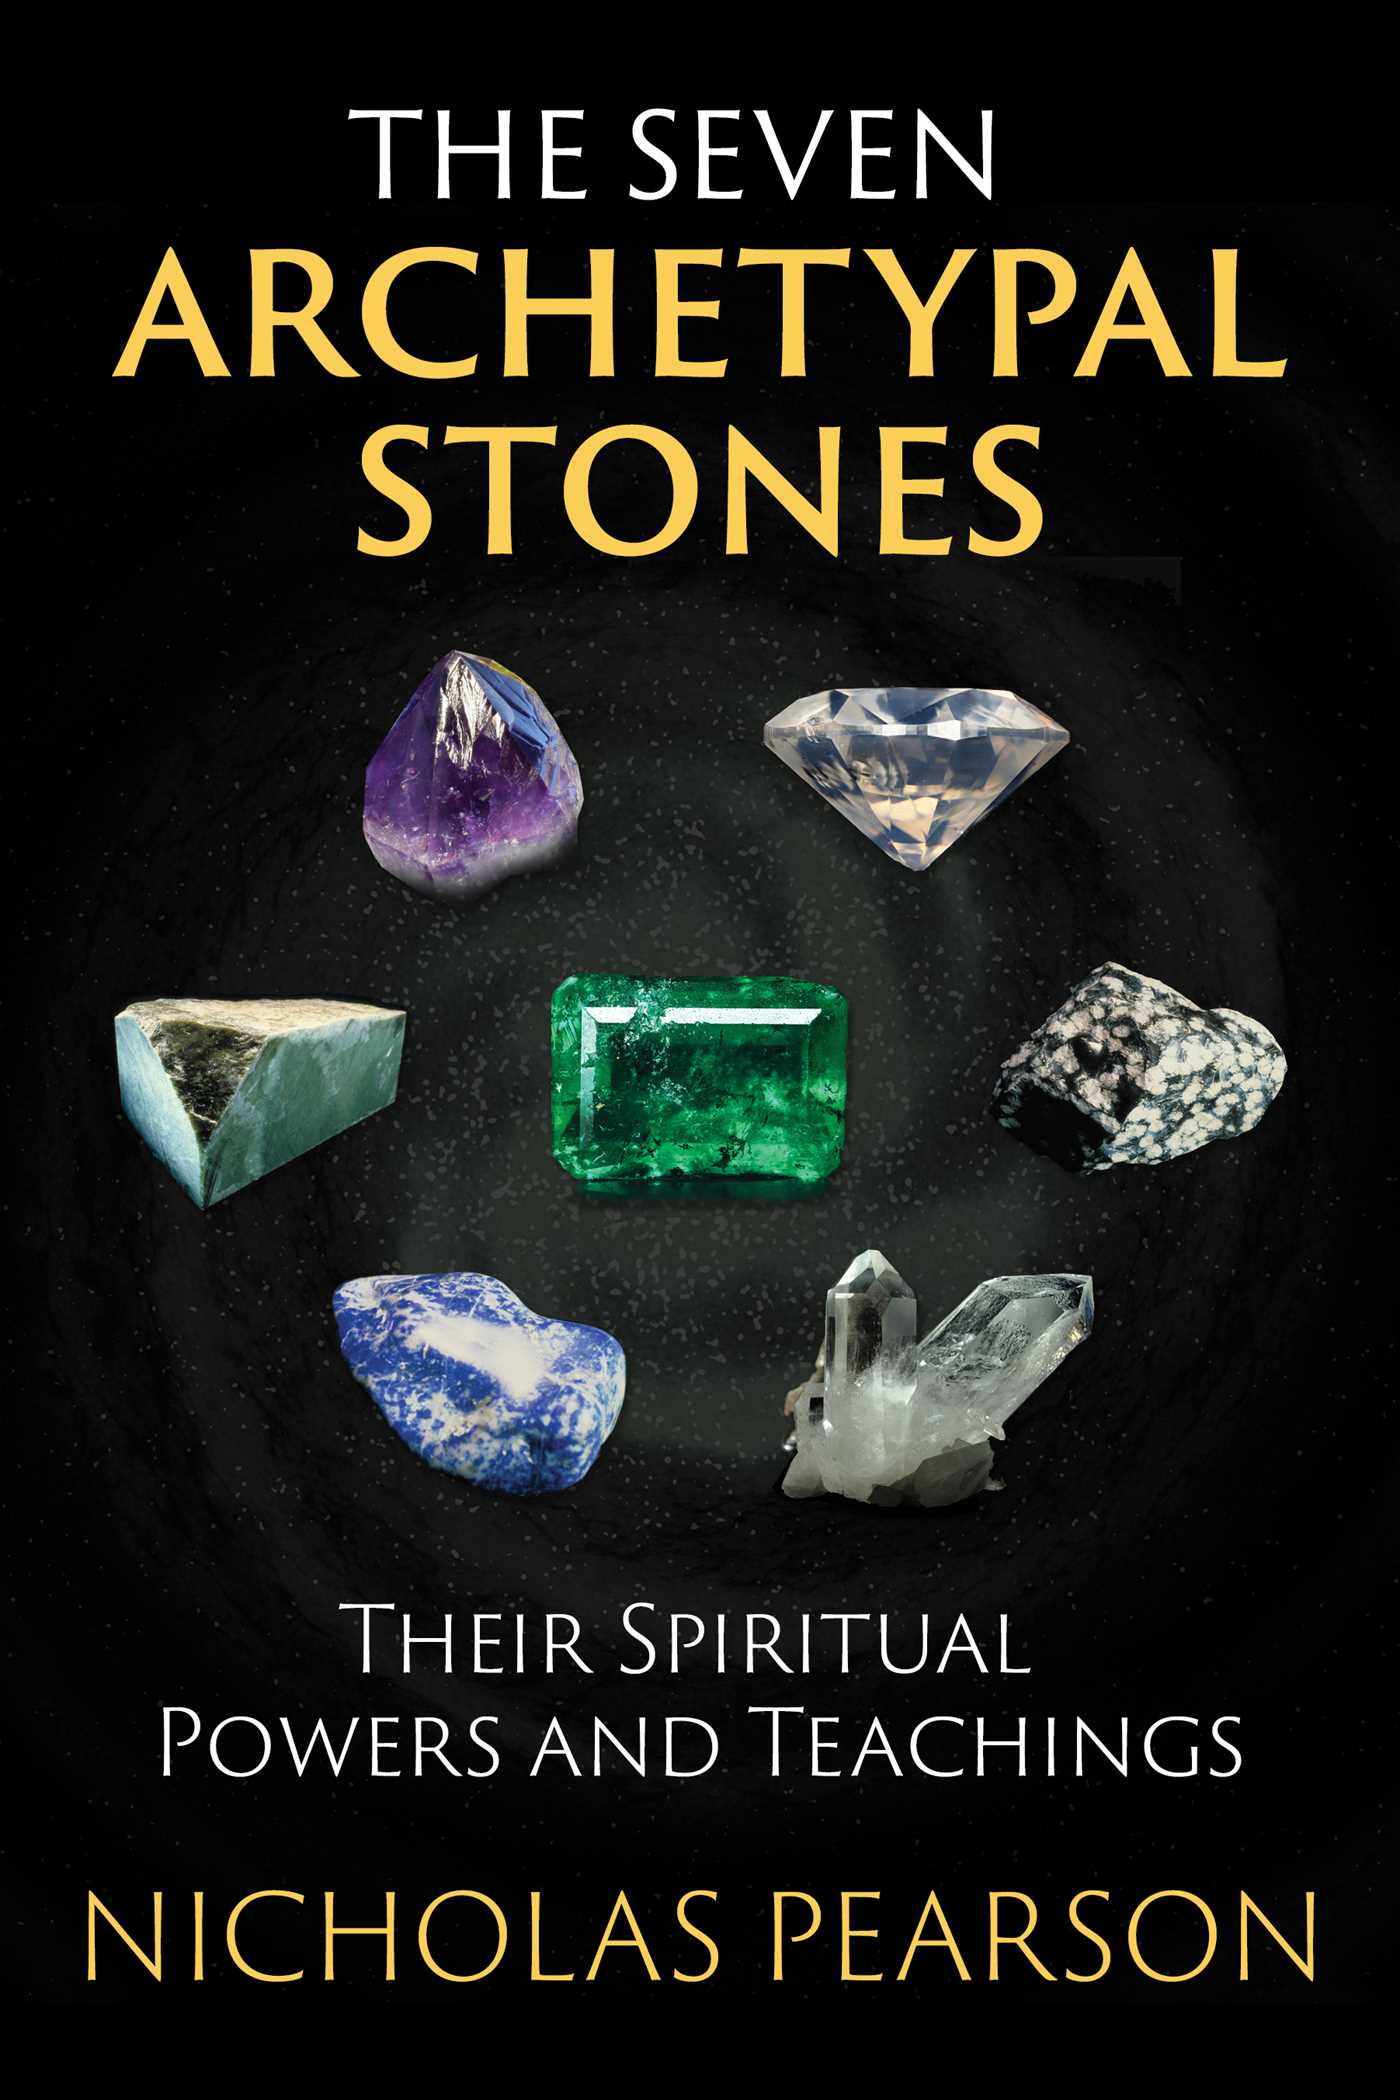 ‘The Missing Link’, Spiritual Powers & Teachings of Precious Stones ?u=https%3A%2F%2Fd28hgpri8am2if.cloudfront.net%2Fbook_images%2Fonix%2Fcvr9781620555477%2Fthe-seven-archetypal-stones-9781620555477_hr